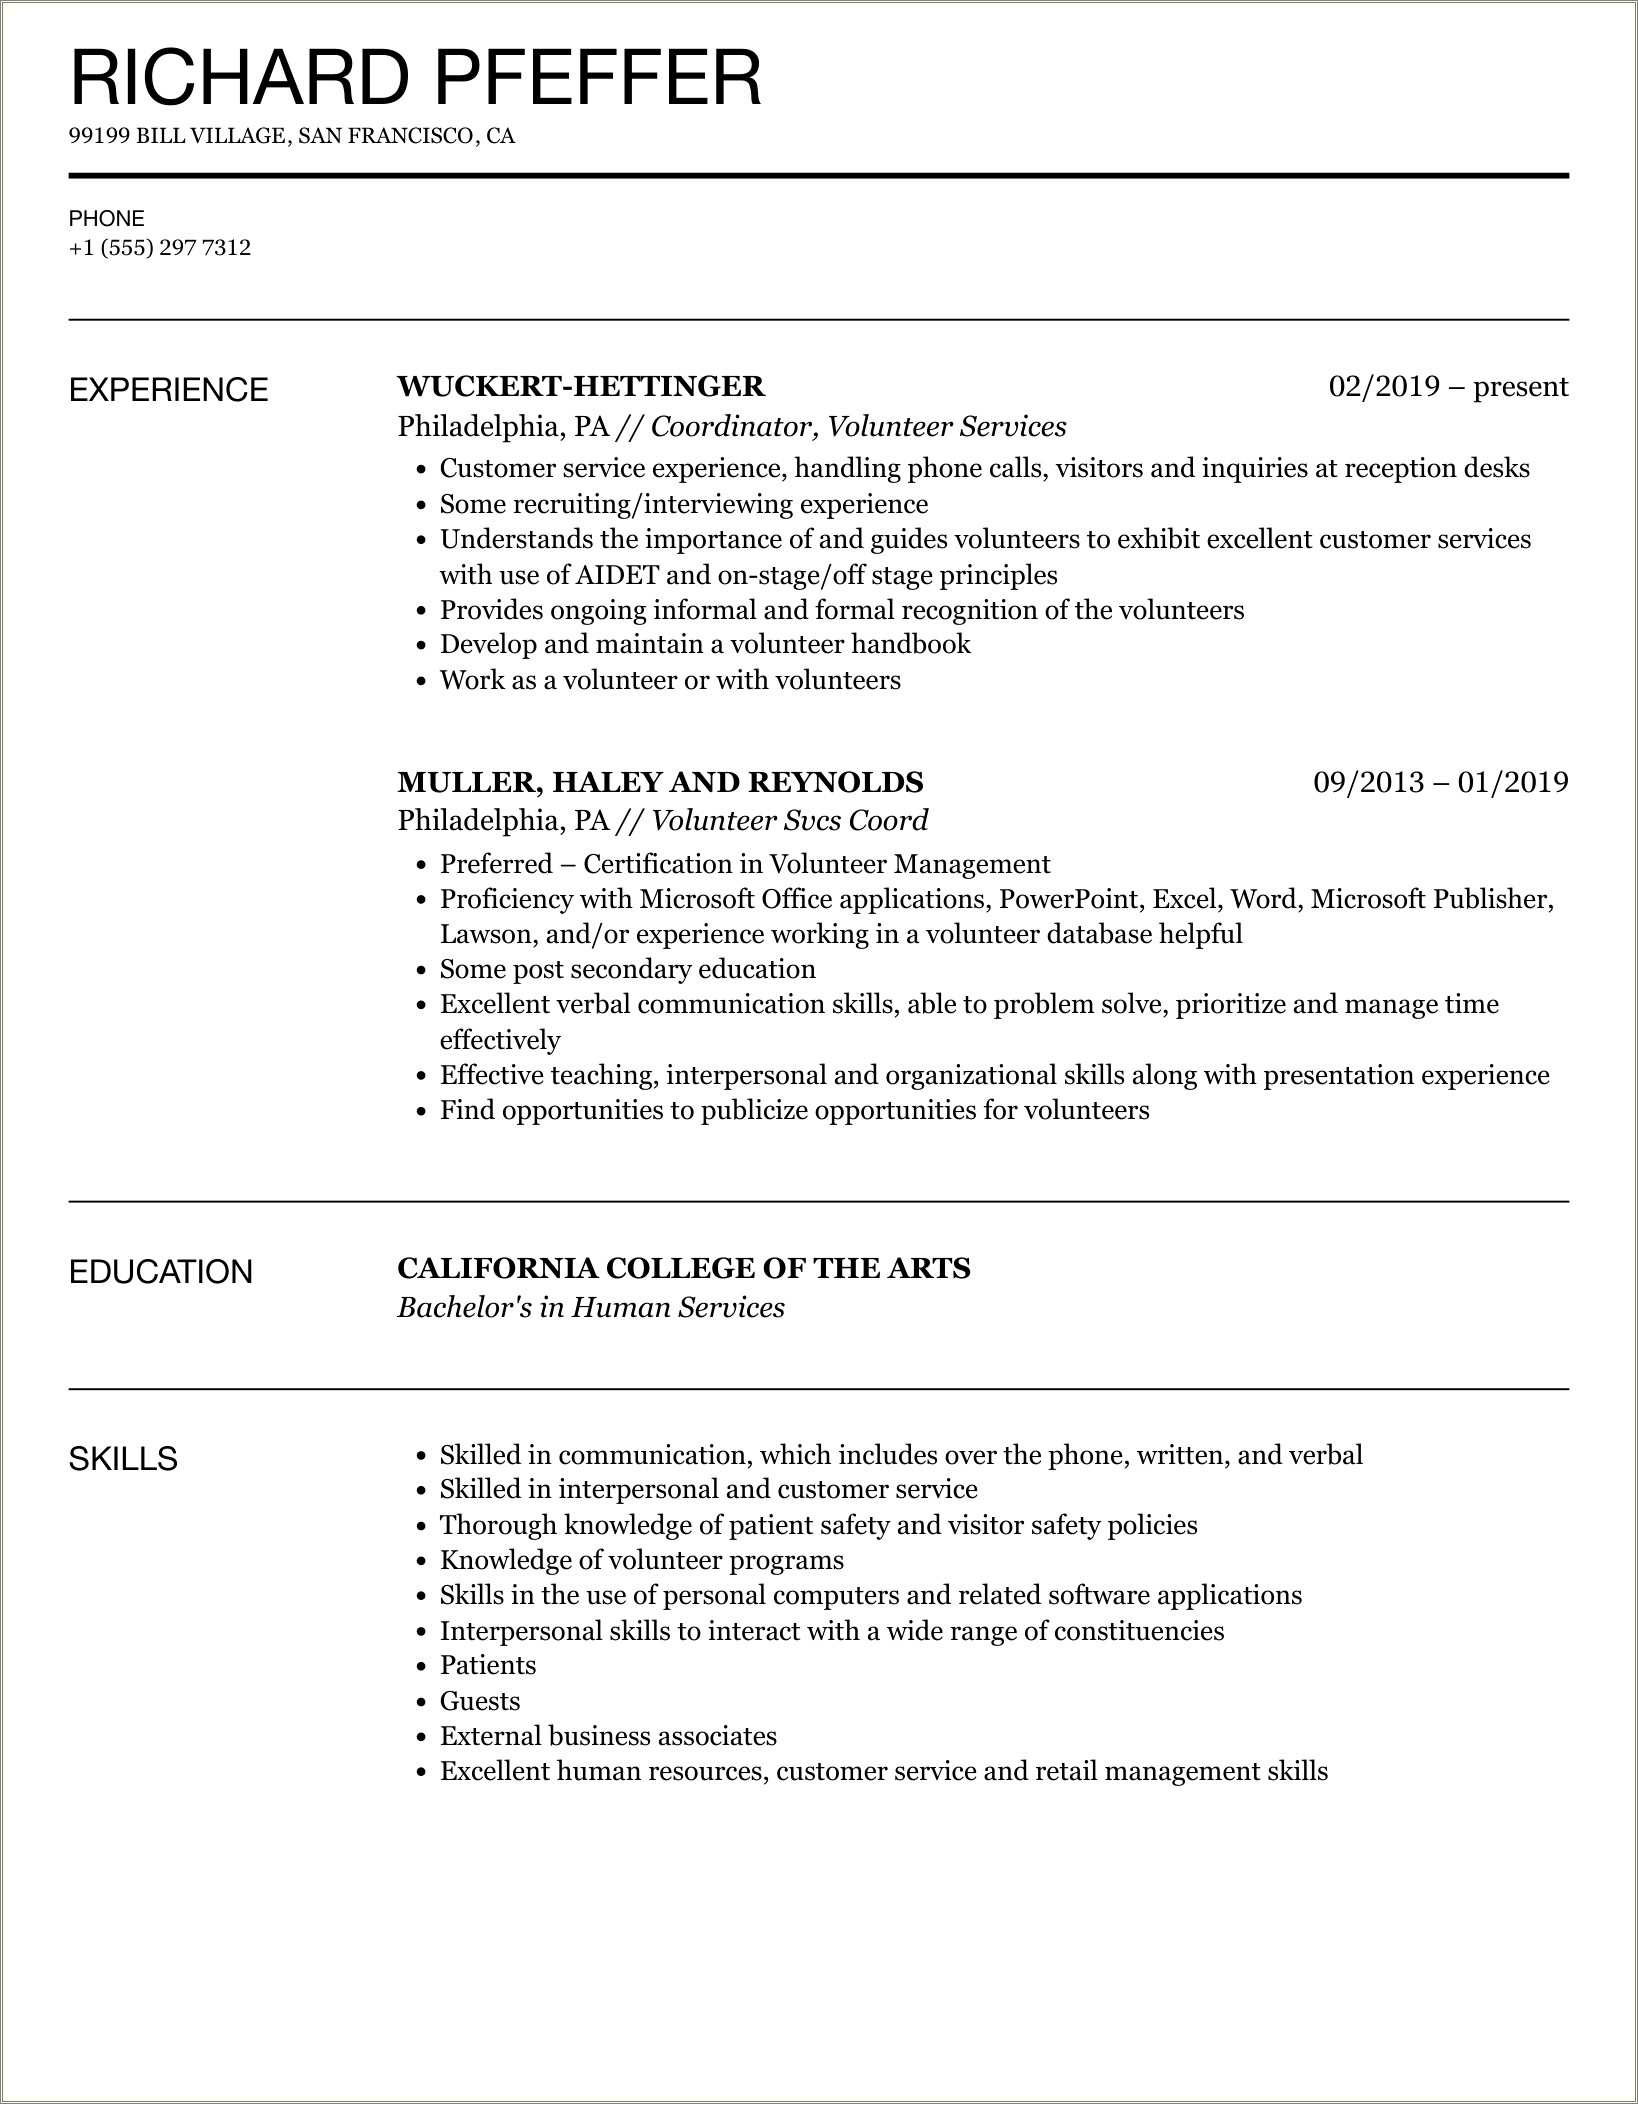 Resume With Volunteer Experience On It